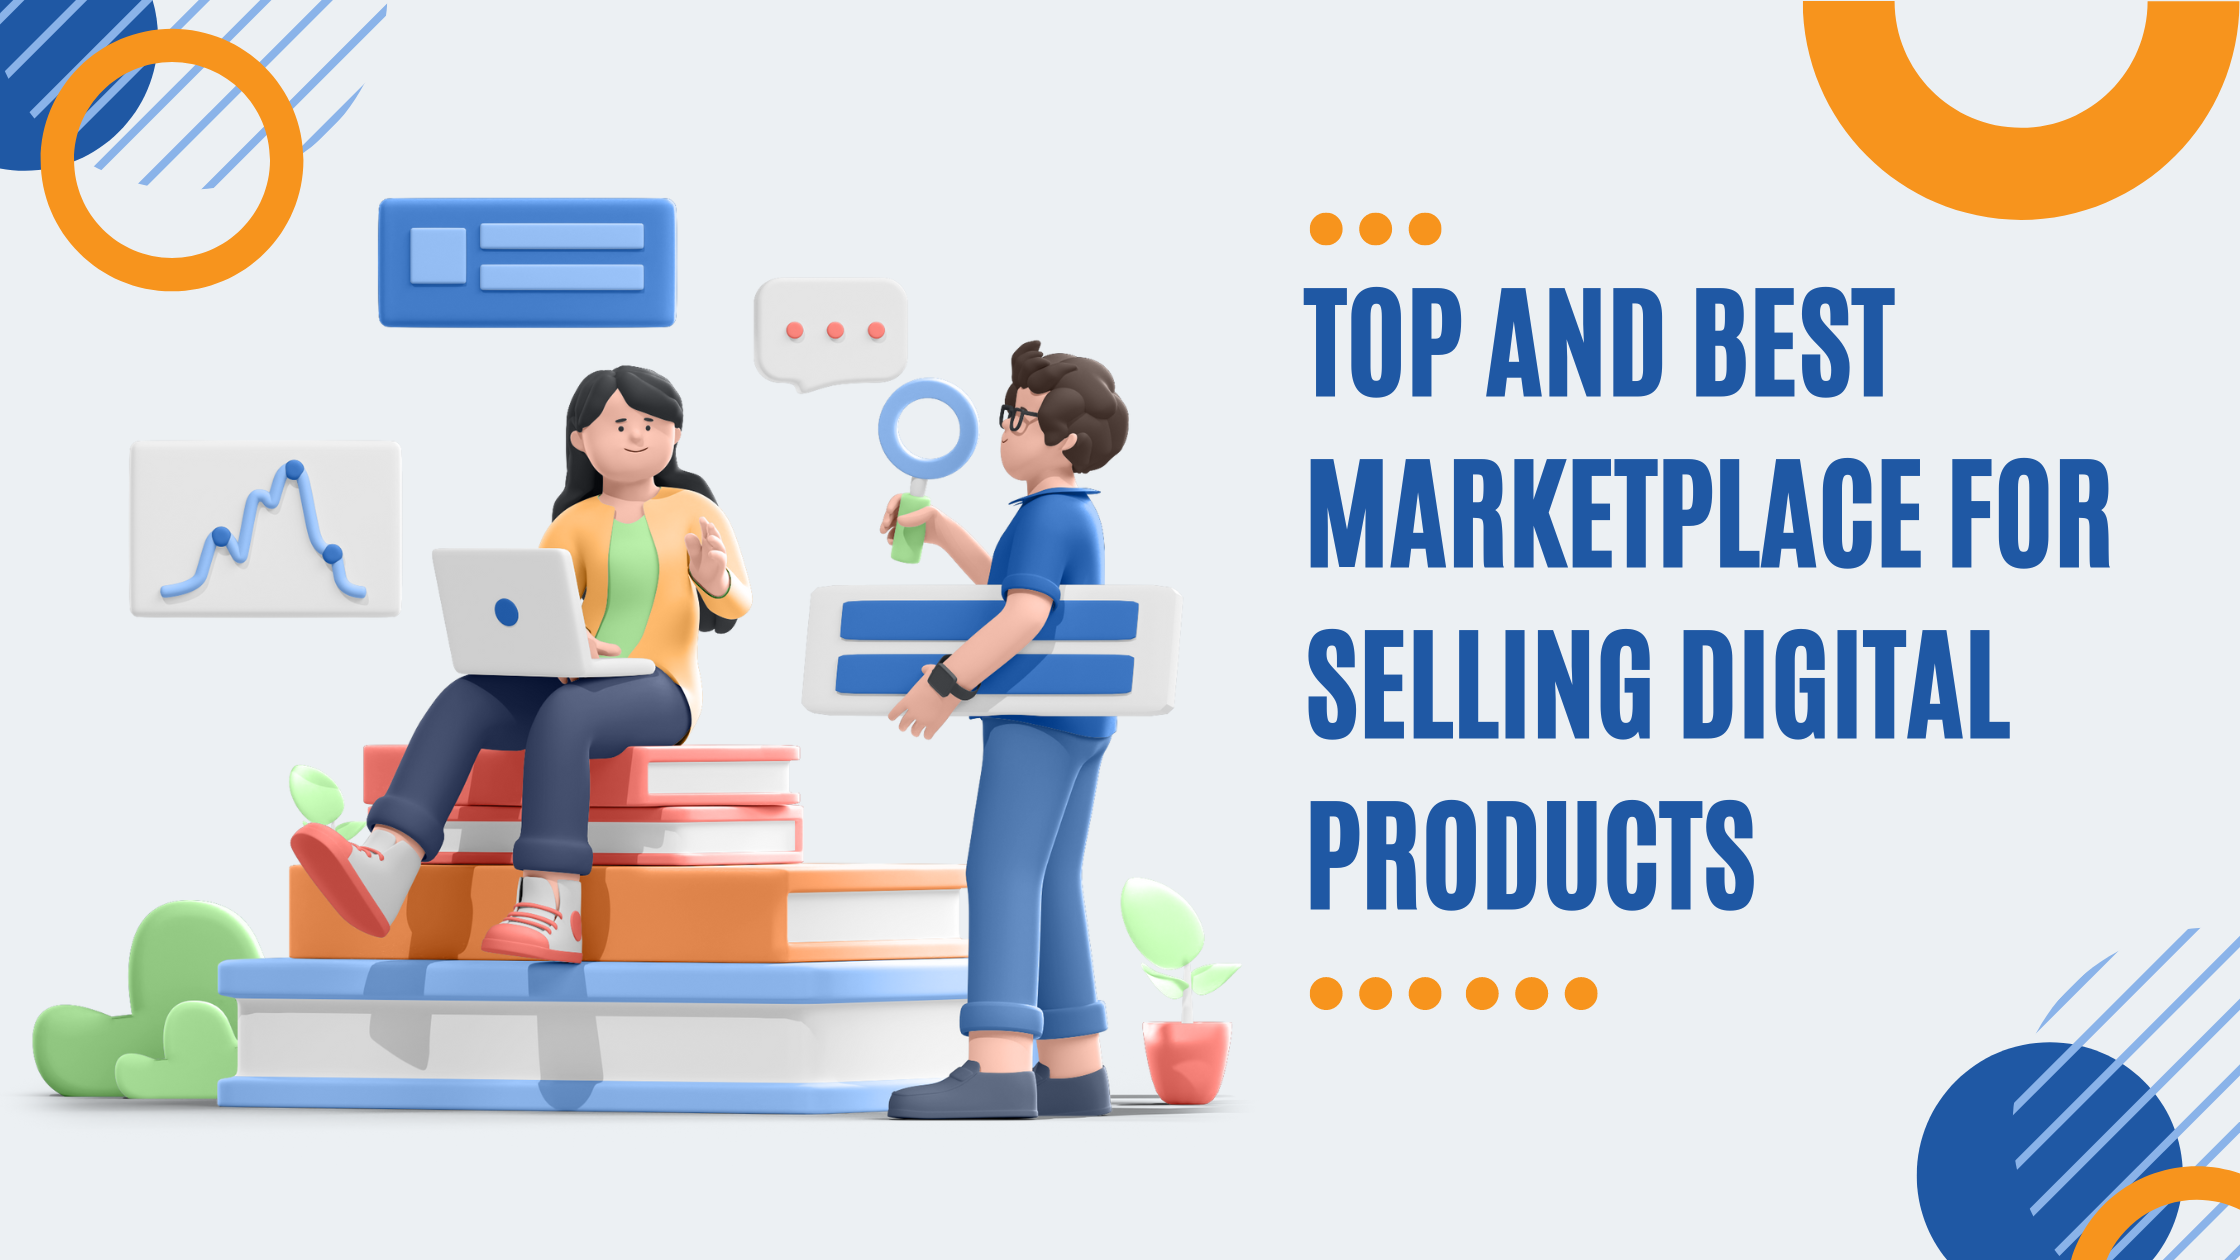 Top and Best Marketplace For Selling Digital Products